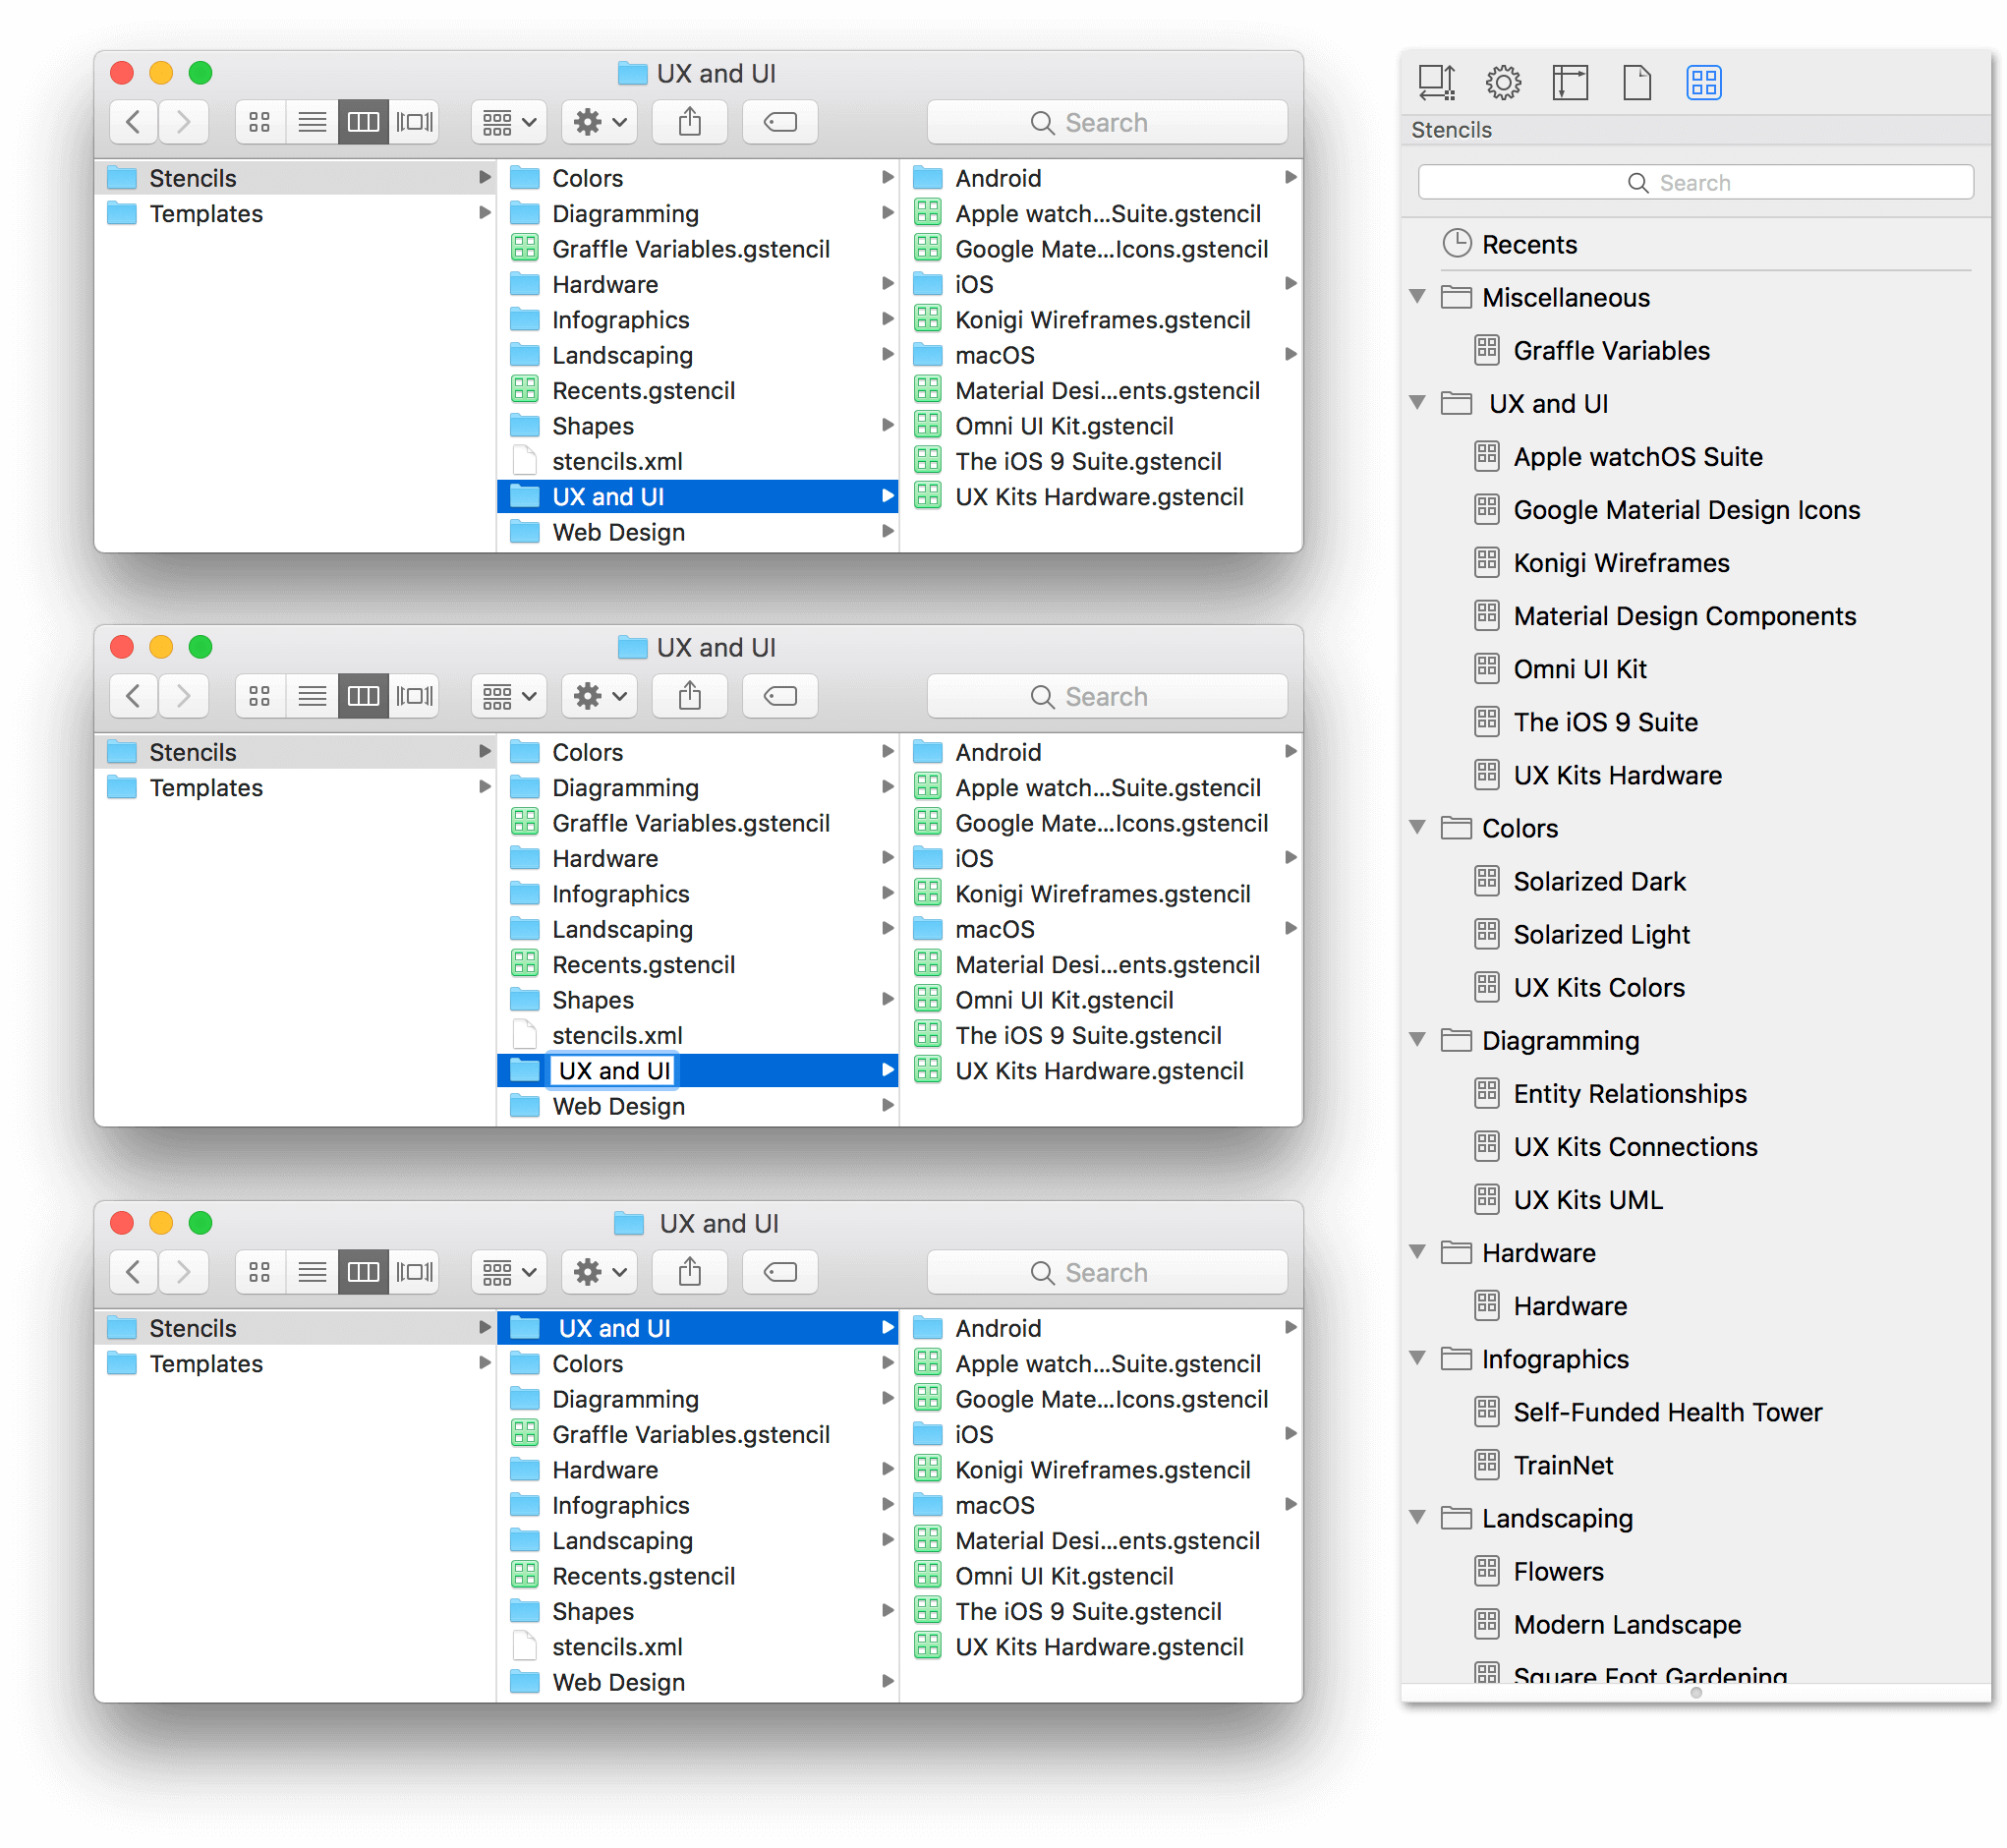 Three Finder windows show the process of renaming the UX and UI folder by adding a space to the front of the folder's name. The Stencil Browser is shown at right, with the UX and UI folder of stencils at the top of the stencils list.